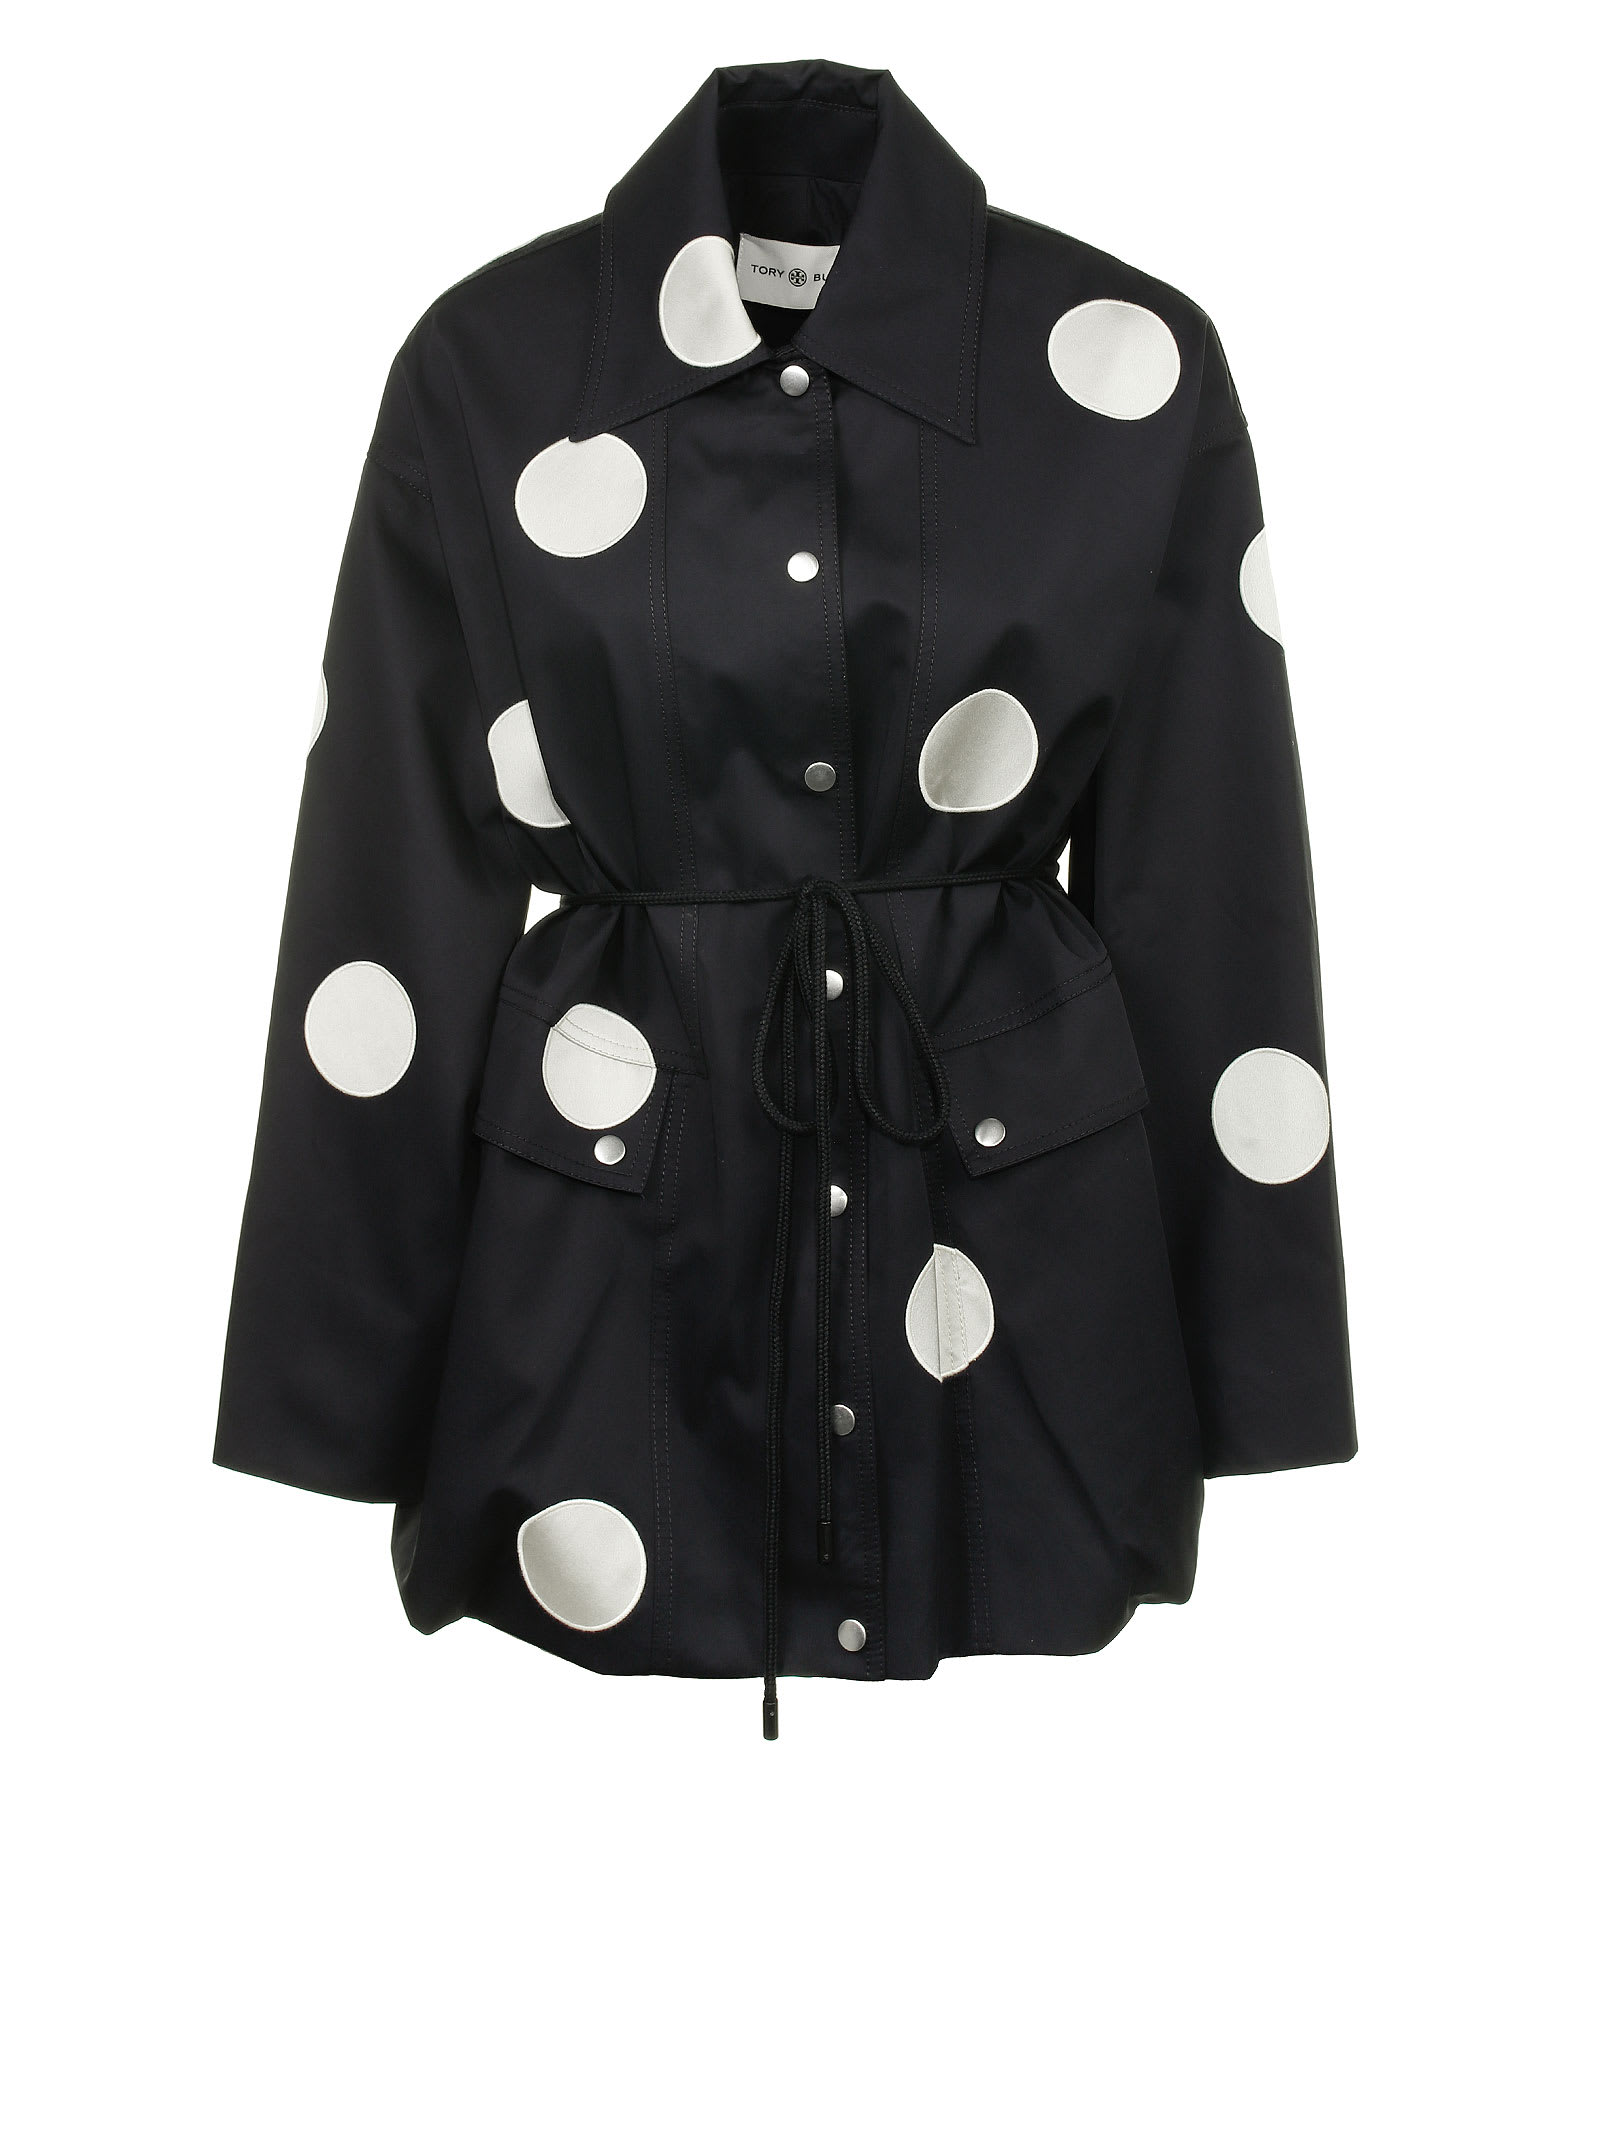 Tory Burch Jacket With Polka Dots